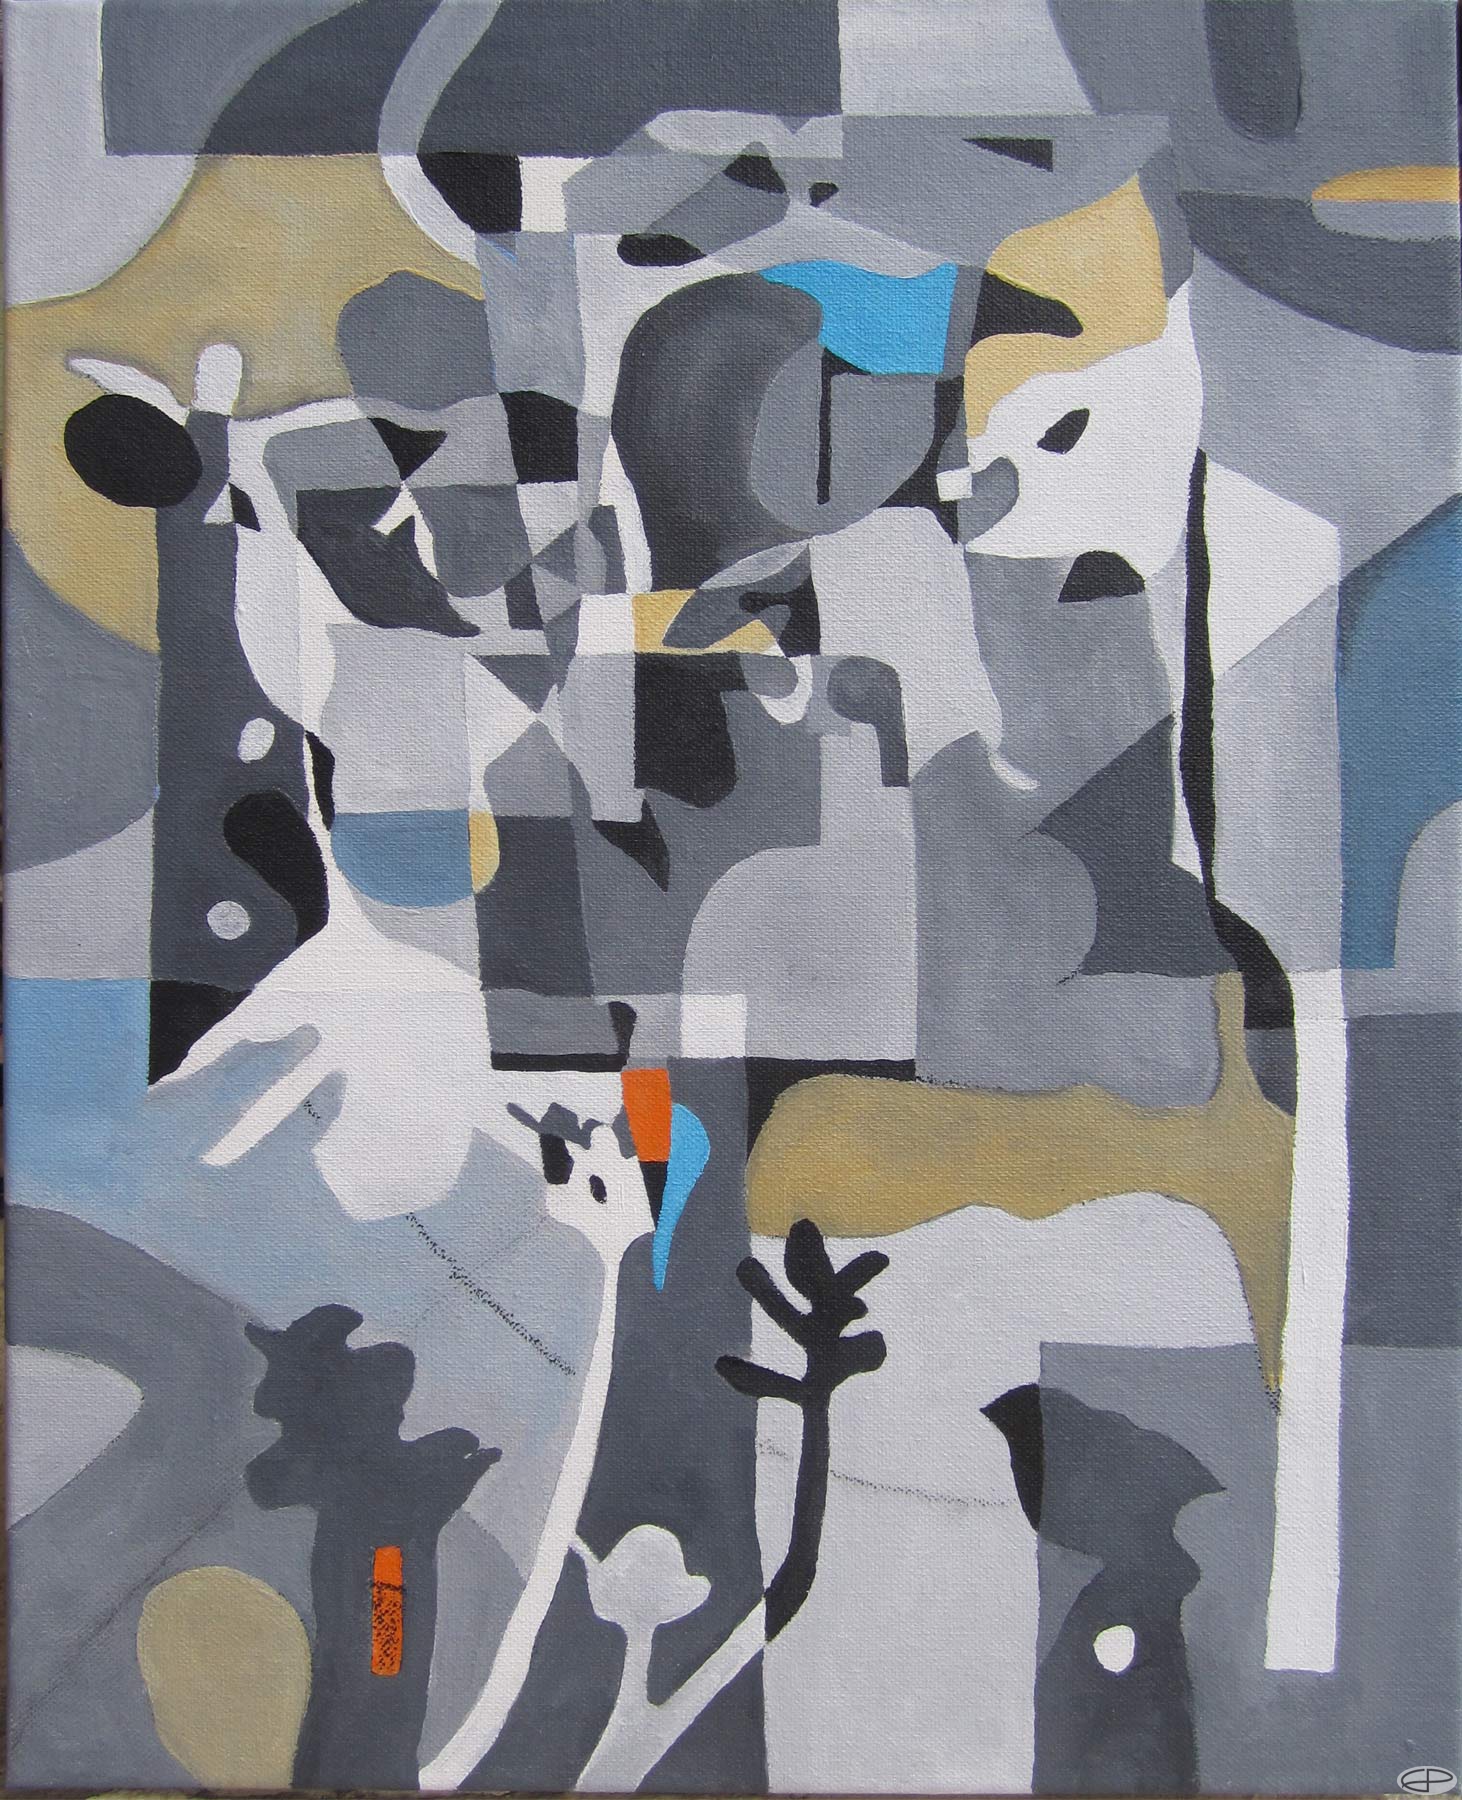 Abstract Painting based on Shadow Patterns | Eric Pedersen